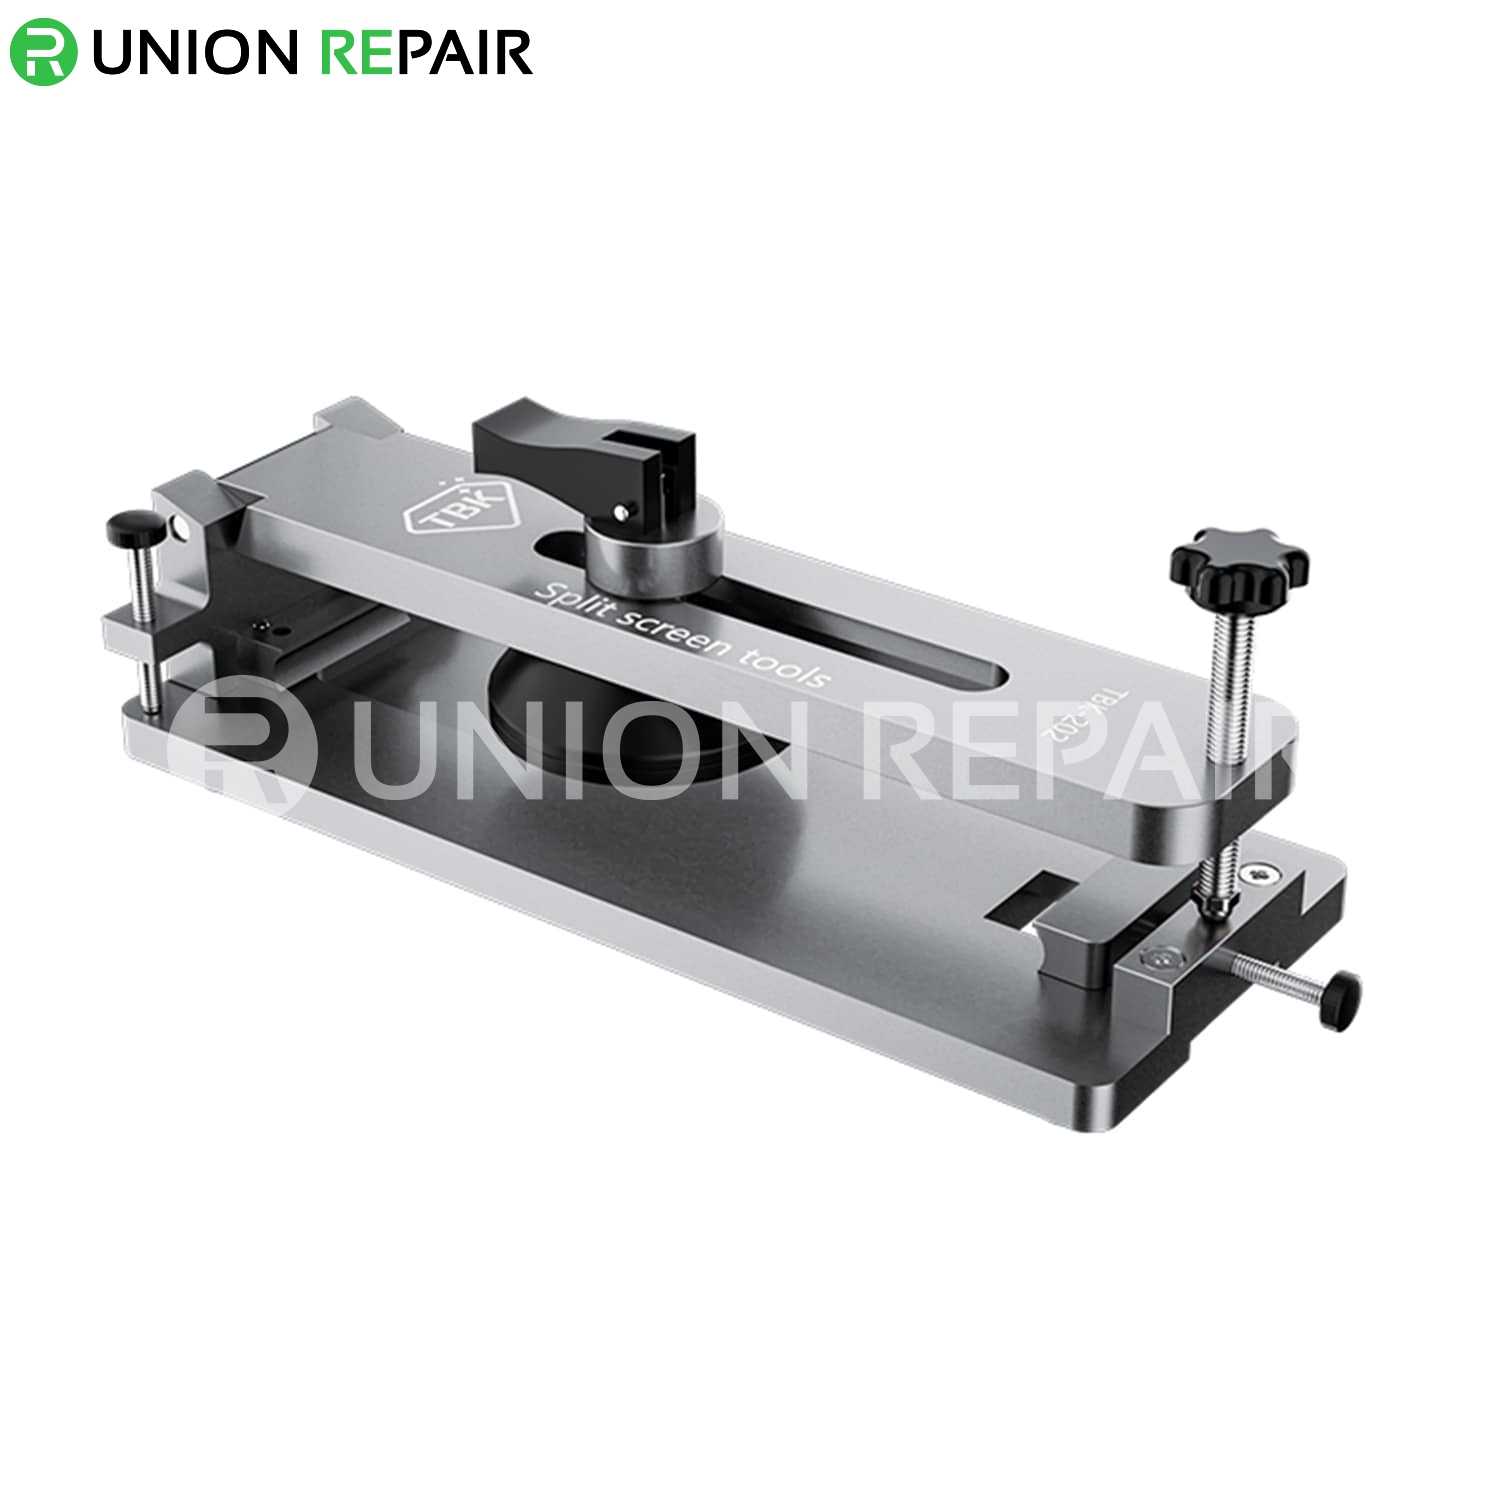 TBK-202 Side Open Universal Unheated LCD Screen Separator